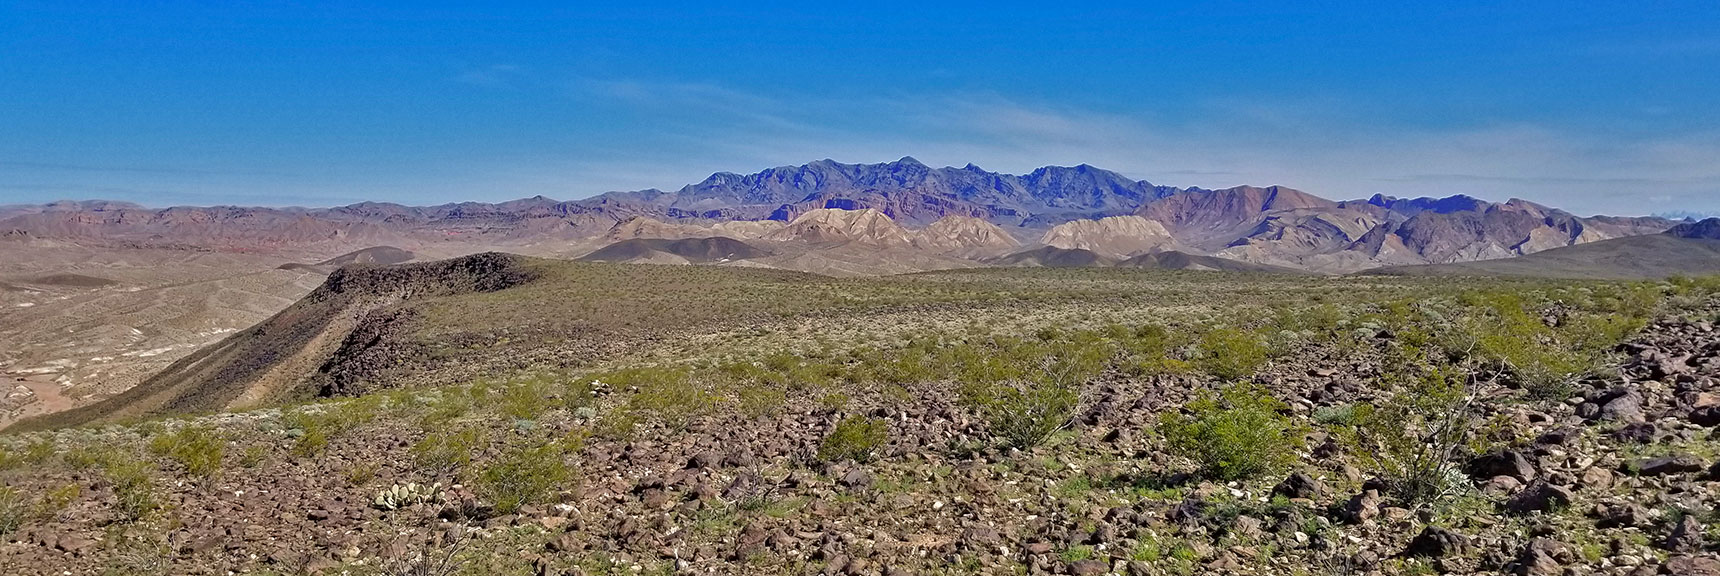 View North Toward Muddy Mountains from Black Mesa in Lake Mead National Recreation Area, Nevada